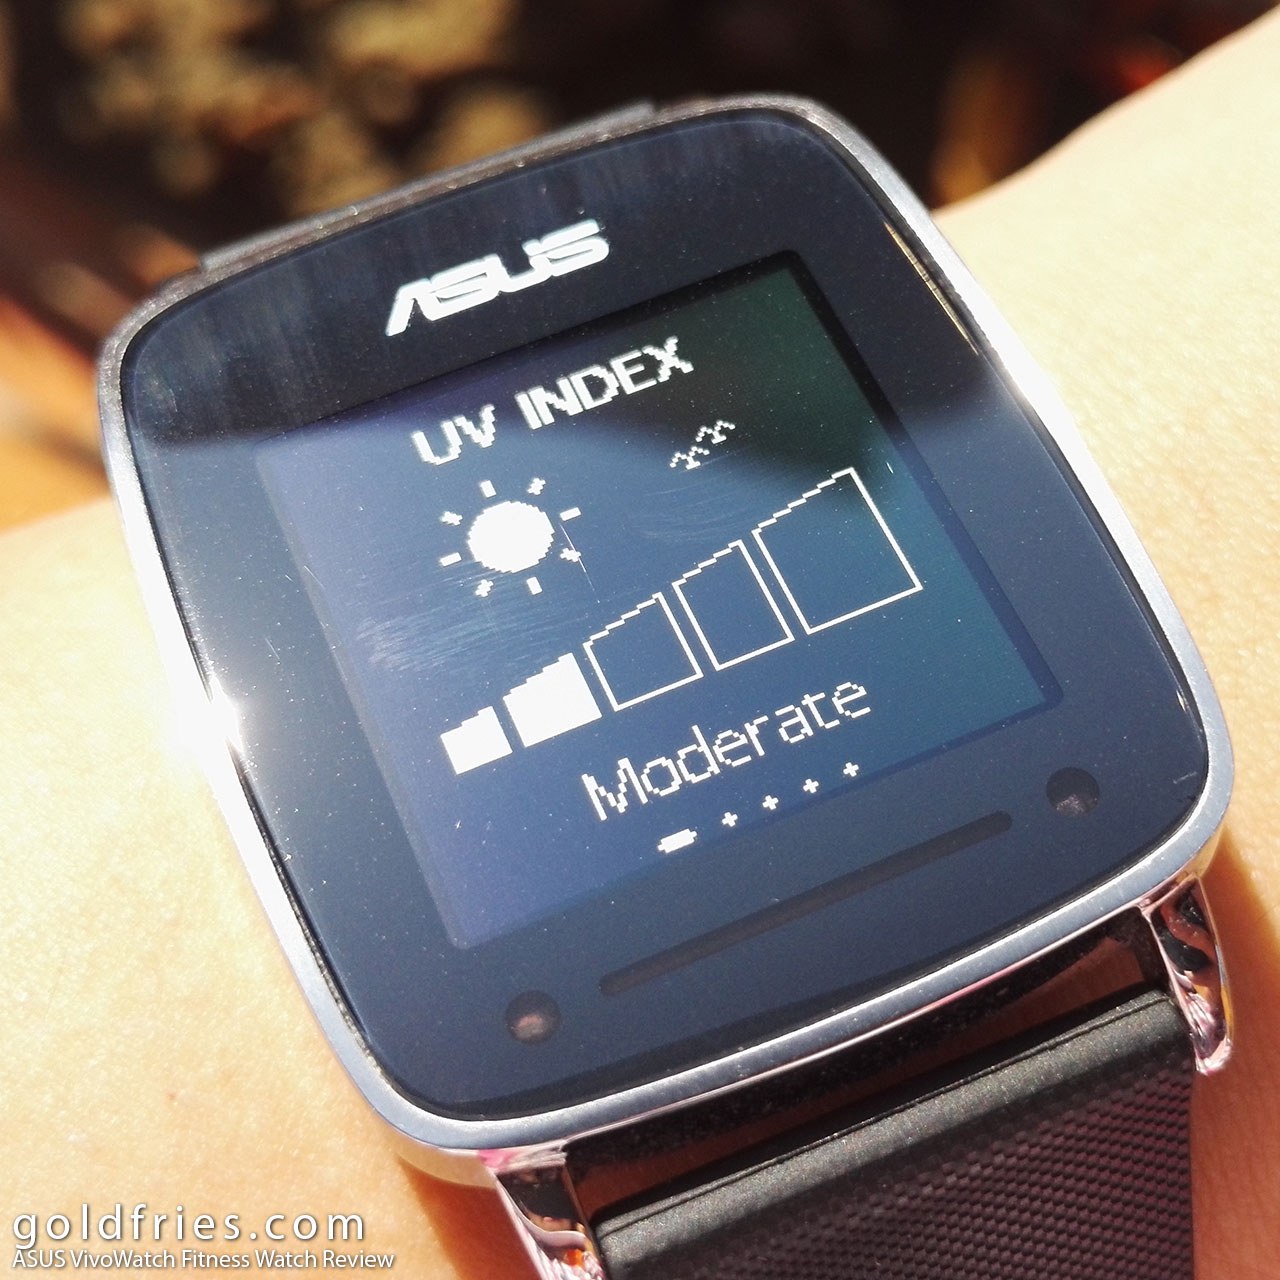 ASUS VivoWatch Fitness Watch Review